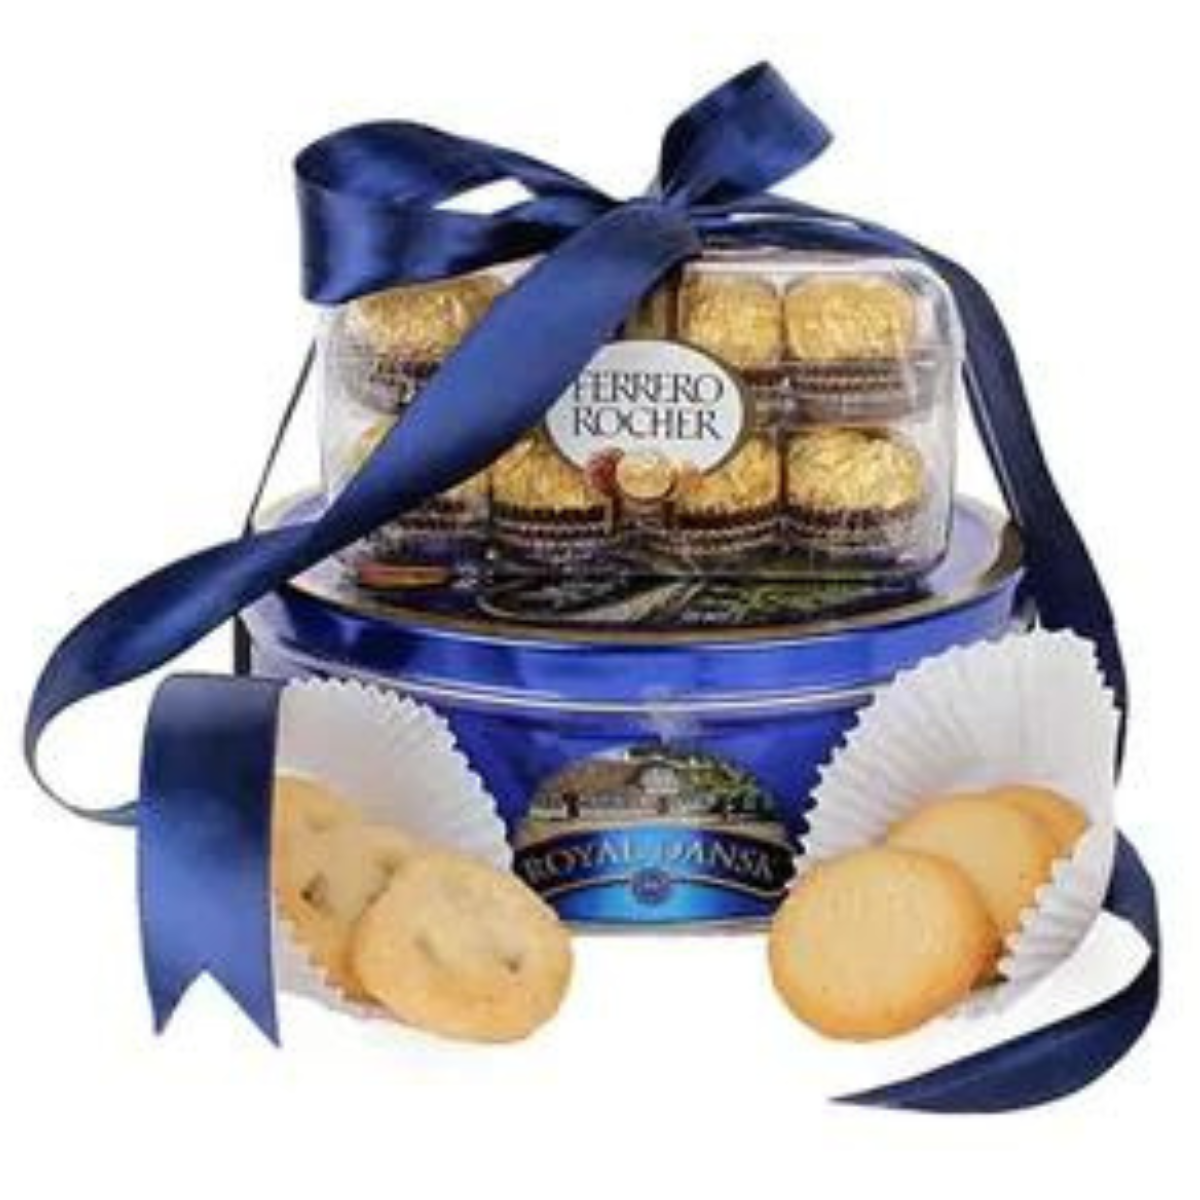 Chocolates & Butter Cookies Combo